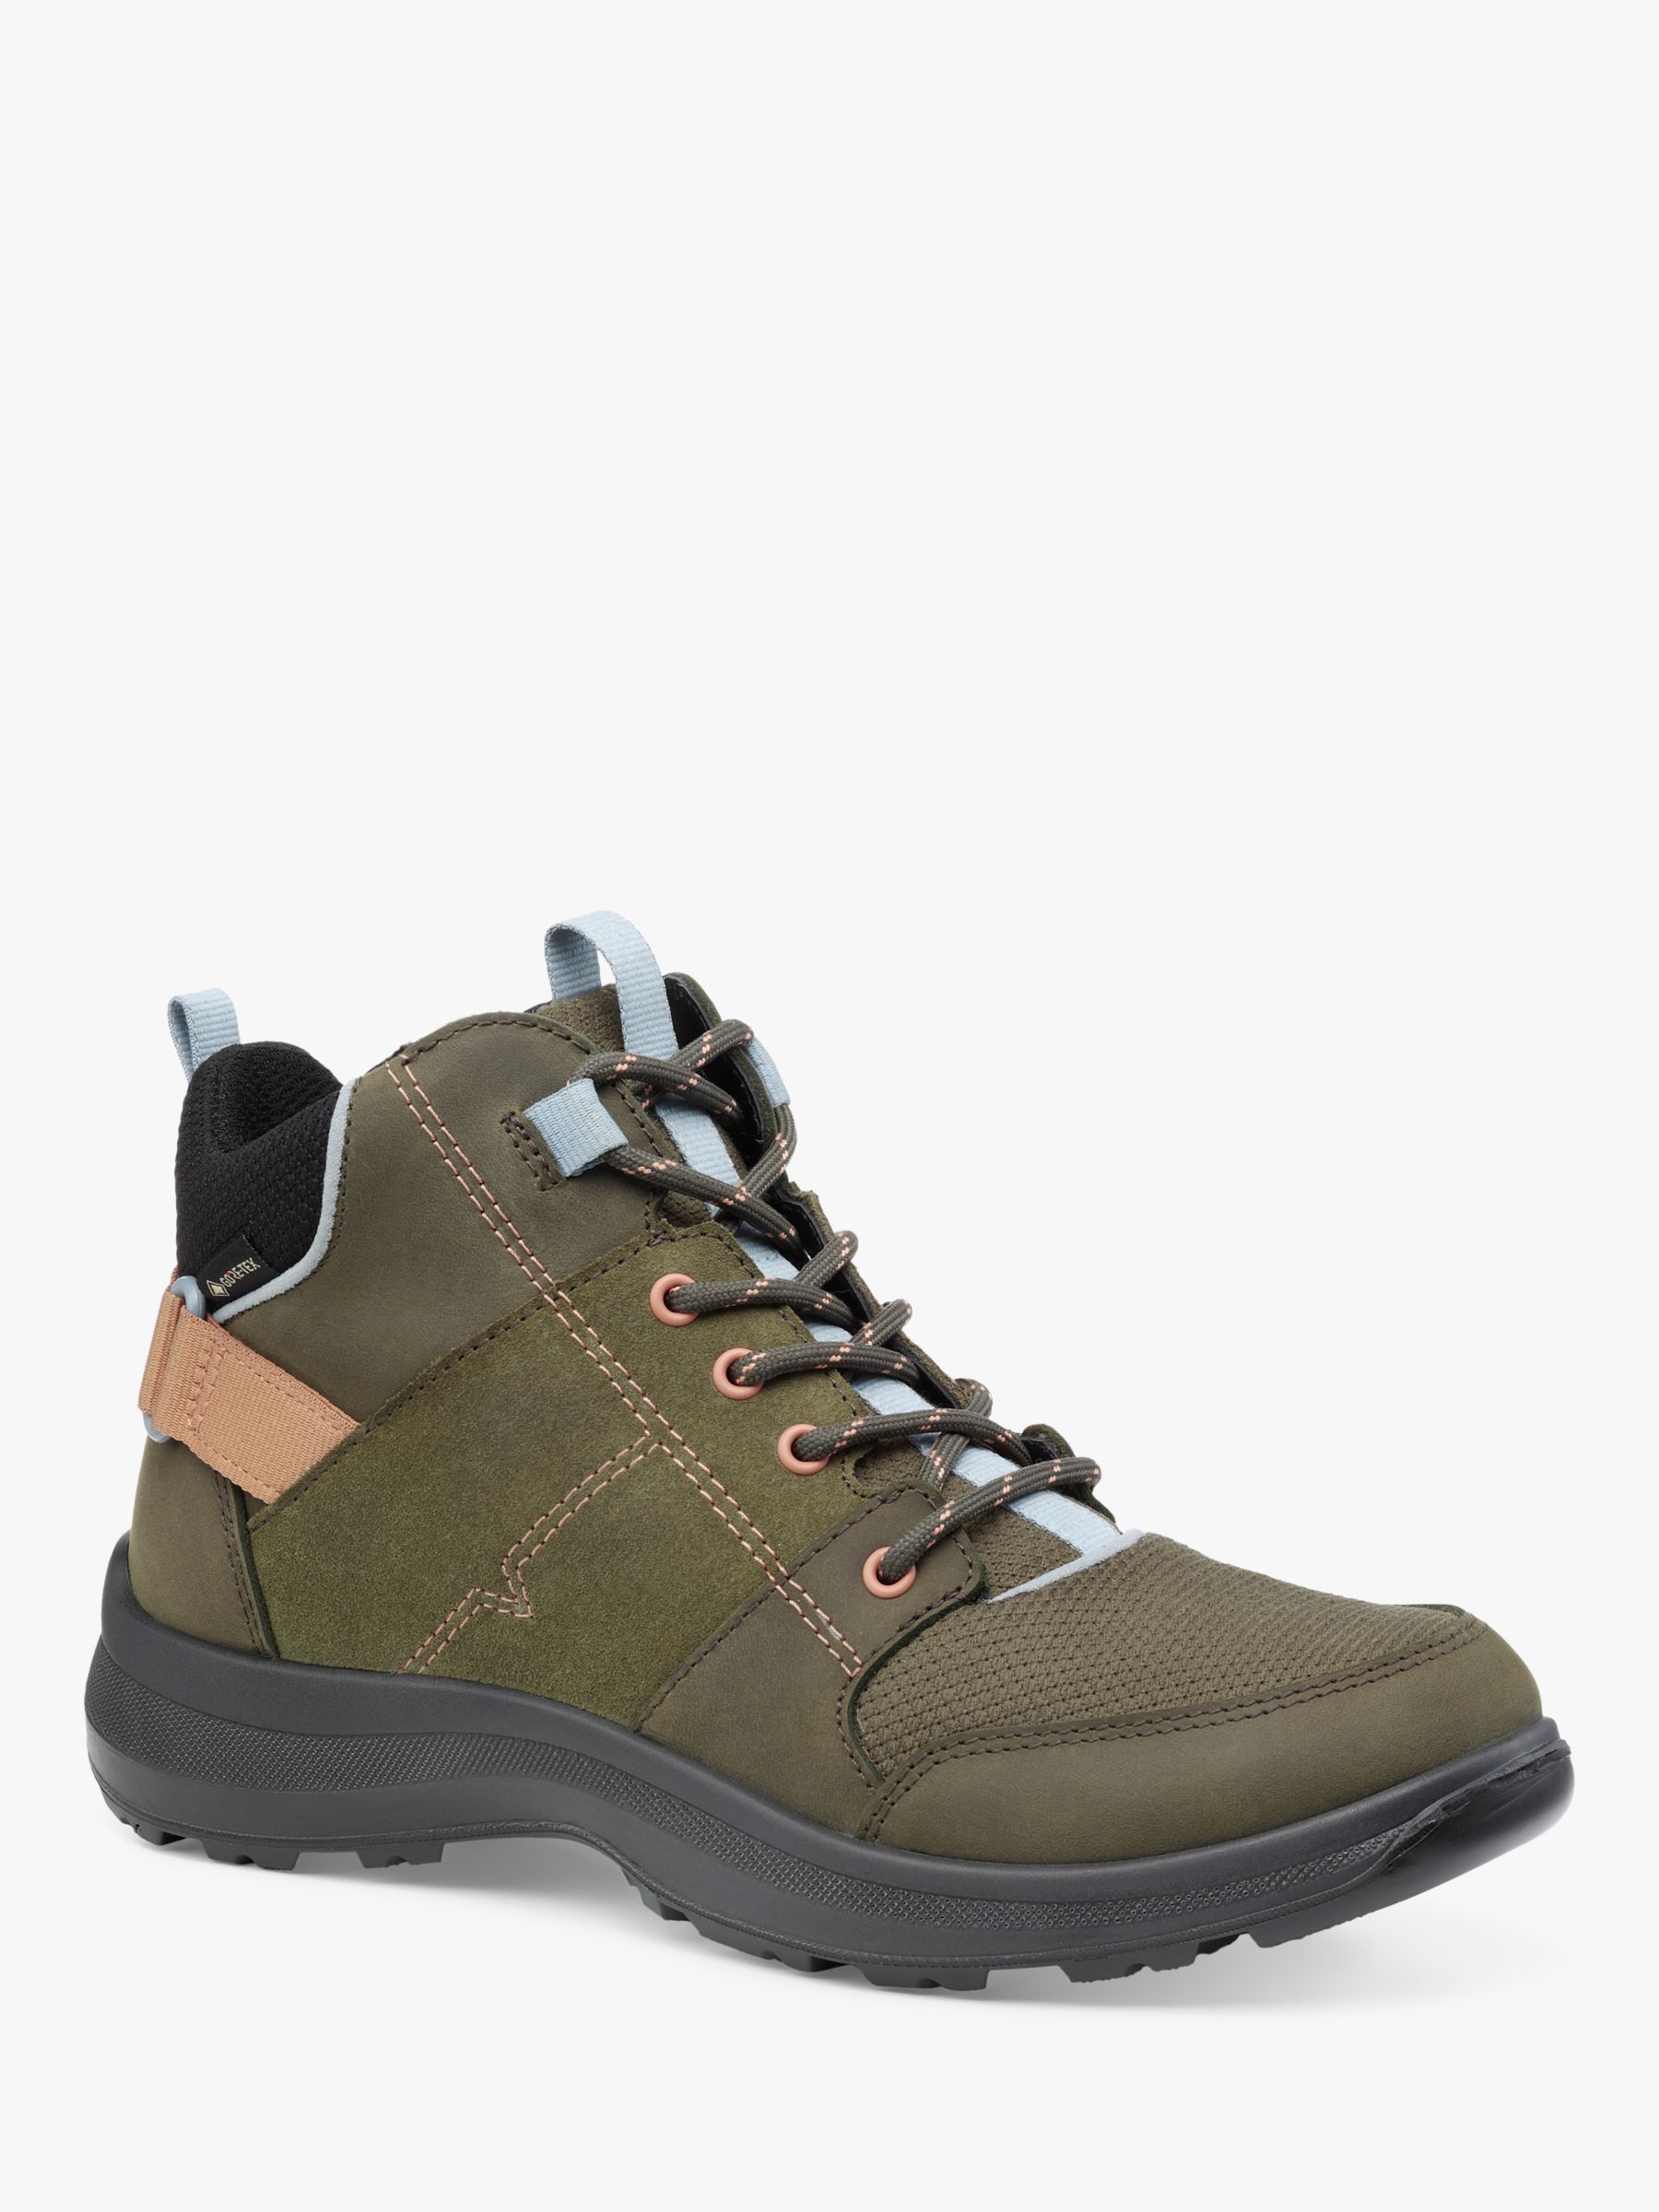 Hotter Trail GTX Suede and Nubuck Hiking Boots, Khaki, 7S